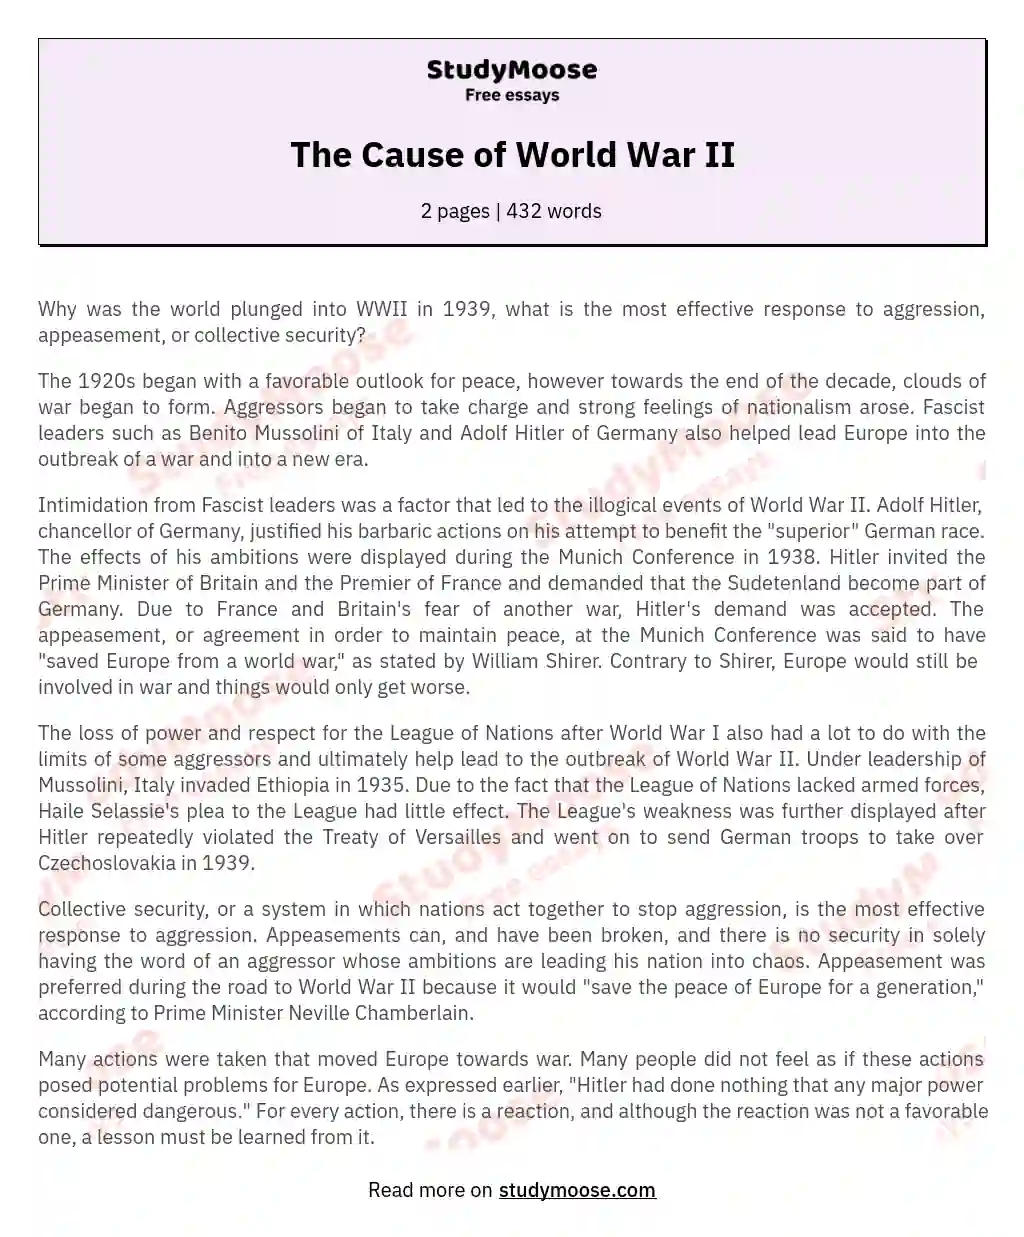 The Roots of World War II: Aggression, Weakness, and Appeasement essay